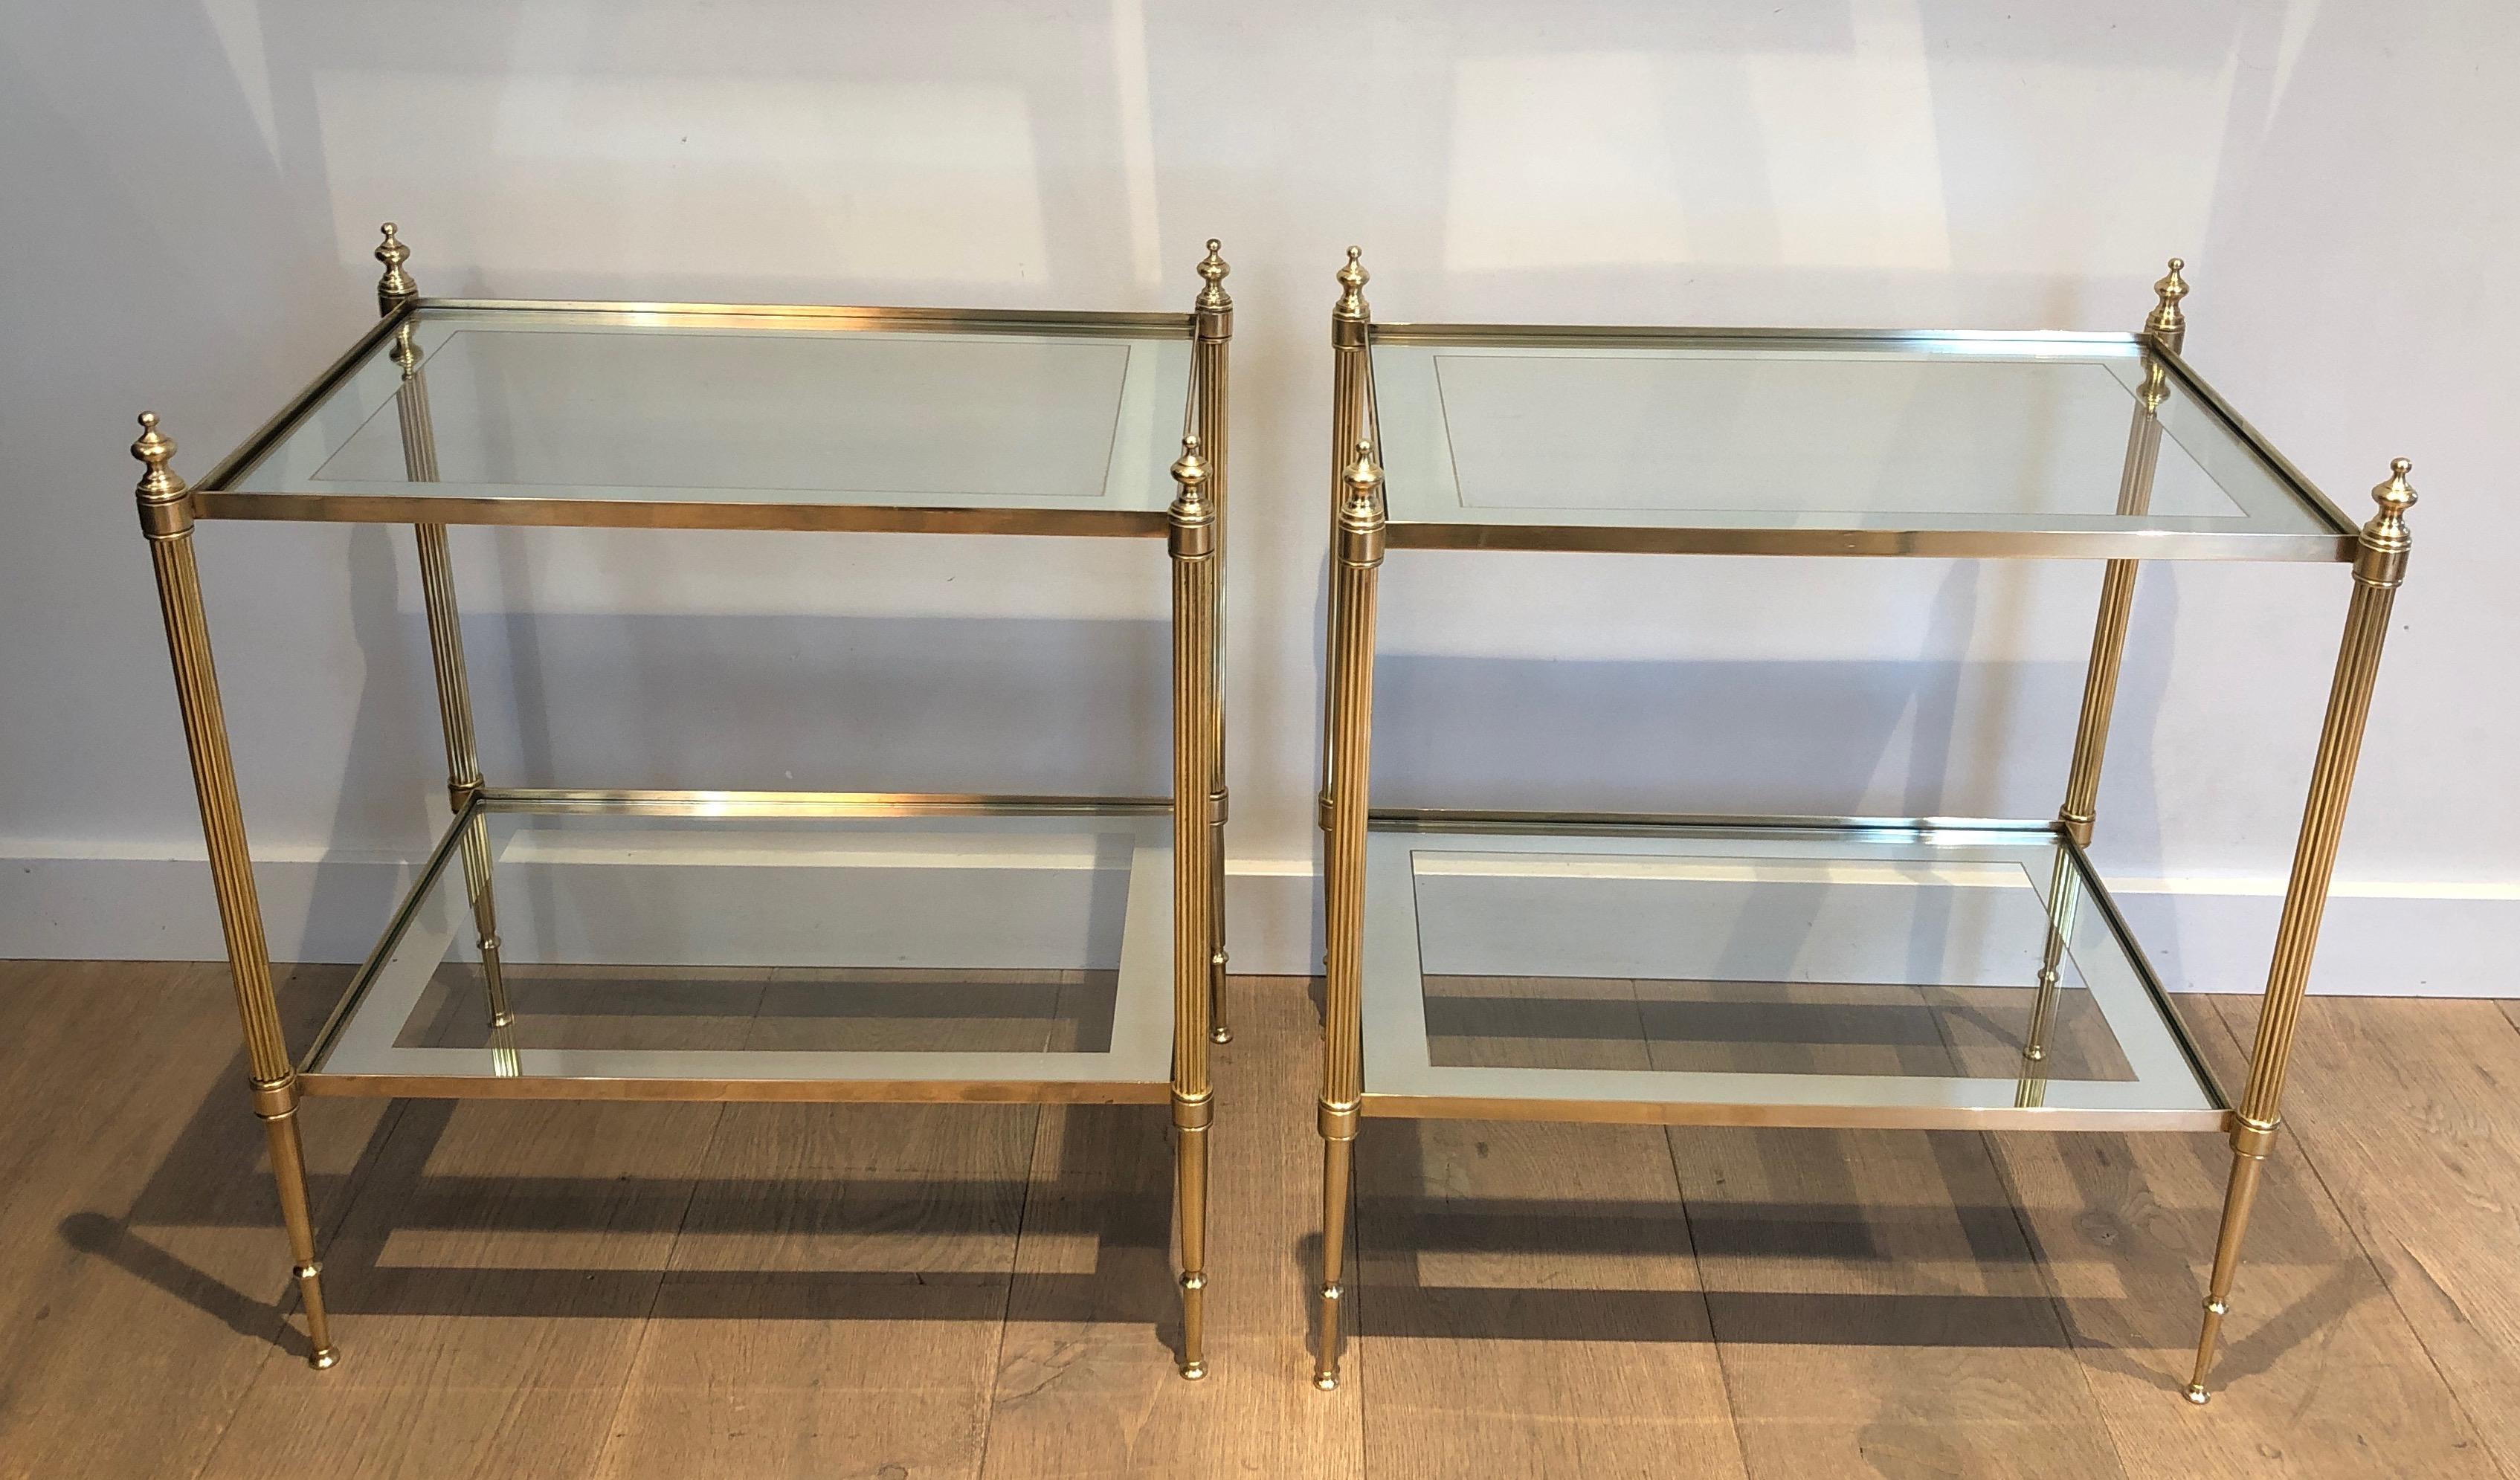 This very nice and elegant pair of neoclassical style side tables is made of  brass with fluted legs and glass shelves surrounded by a silvered mirror line. This is a French work by Maison Jansen. Circa 1940